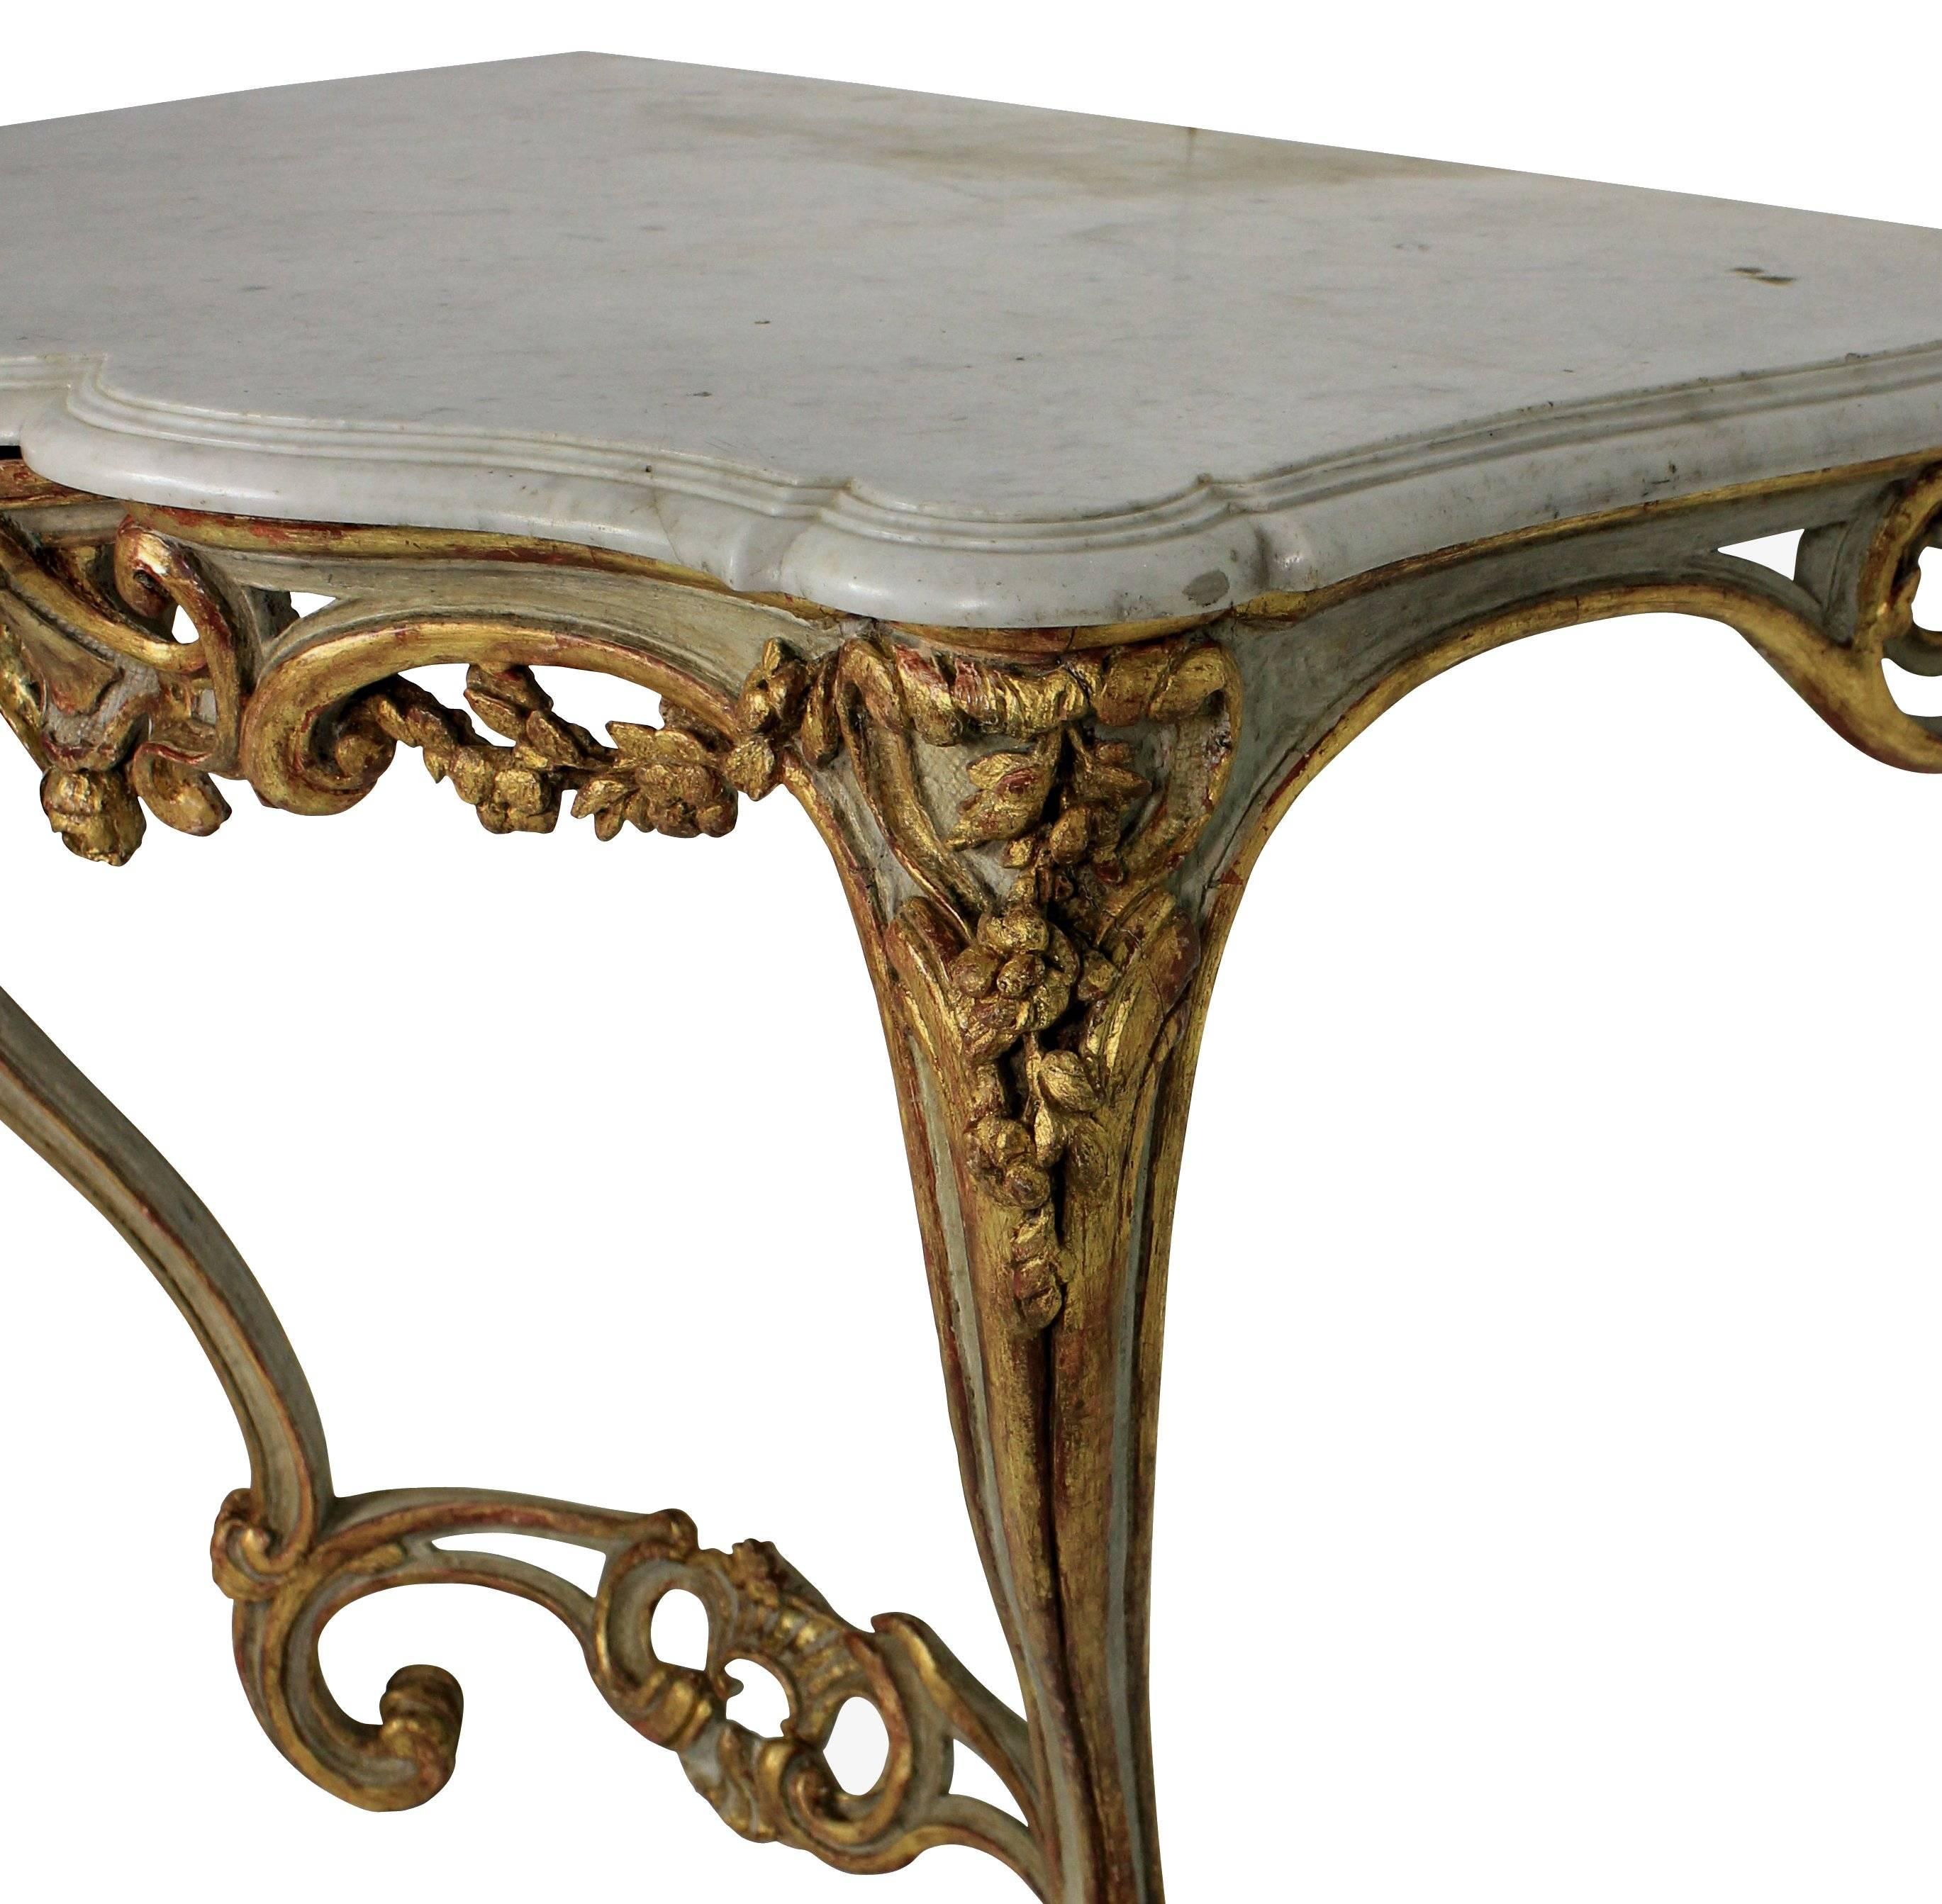 A French carved, painted and gilded serpentine console with a dove grey shaped marble top.